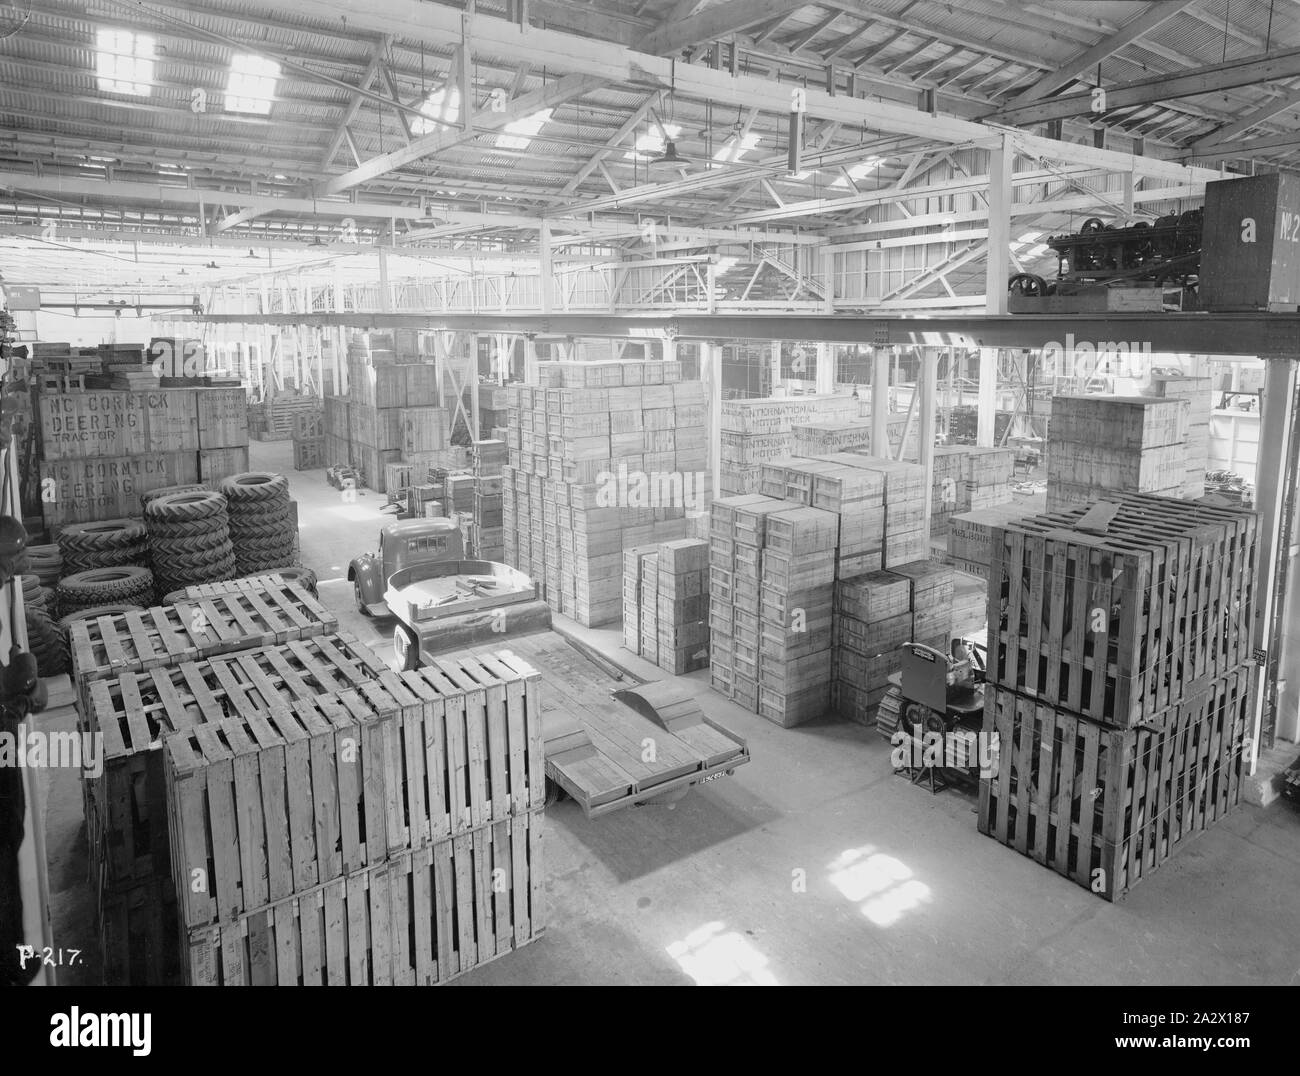 Negative - International Harvester, Interior of Machinery Warehouse, South Melbourne, Victoria, 1940, Part of a large collection of glass plate and film negatives, transparencies, photo albums, product catalogues, videos, motion picture films, company journals, advertisements and newspaper cuttings relating to the operations of the International Harvester Company and its subsidiaries in Australia. The International Harvester Company of America was formed in 1902 by the merger of five leading Stock Photo